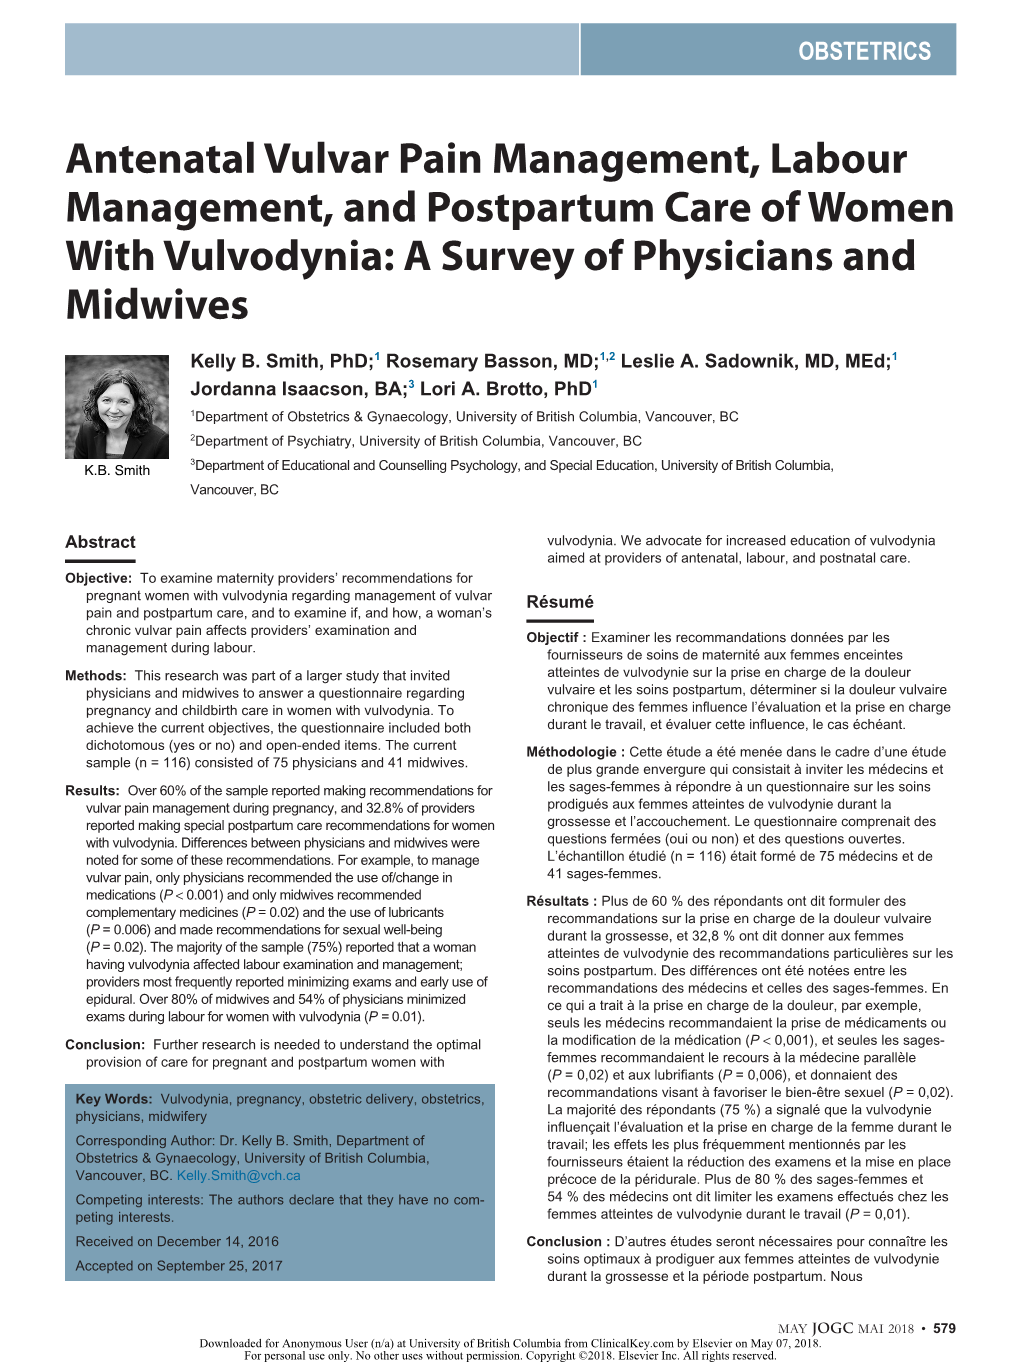 Antenatal Vulvar Pain Management, Labour Management, and Postpartum Care of Women with Vulvodynia: a Survey of Physicians and Midwives